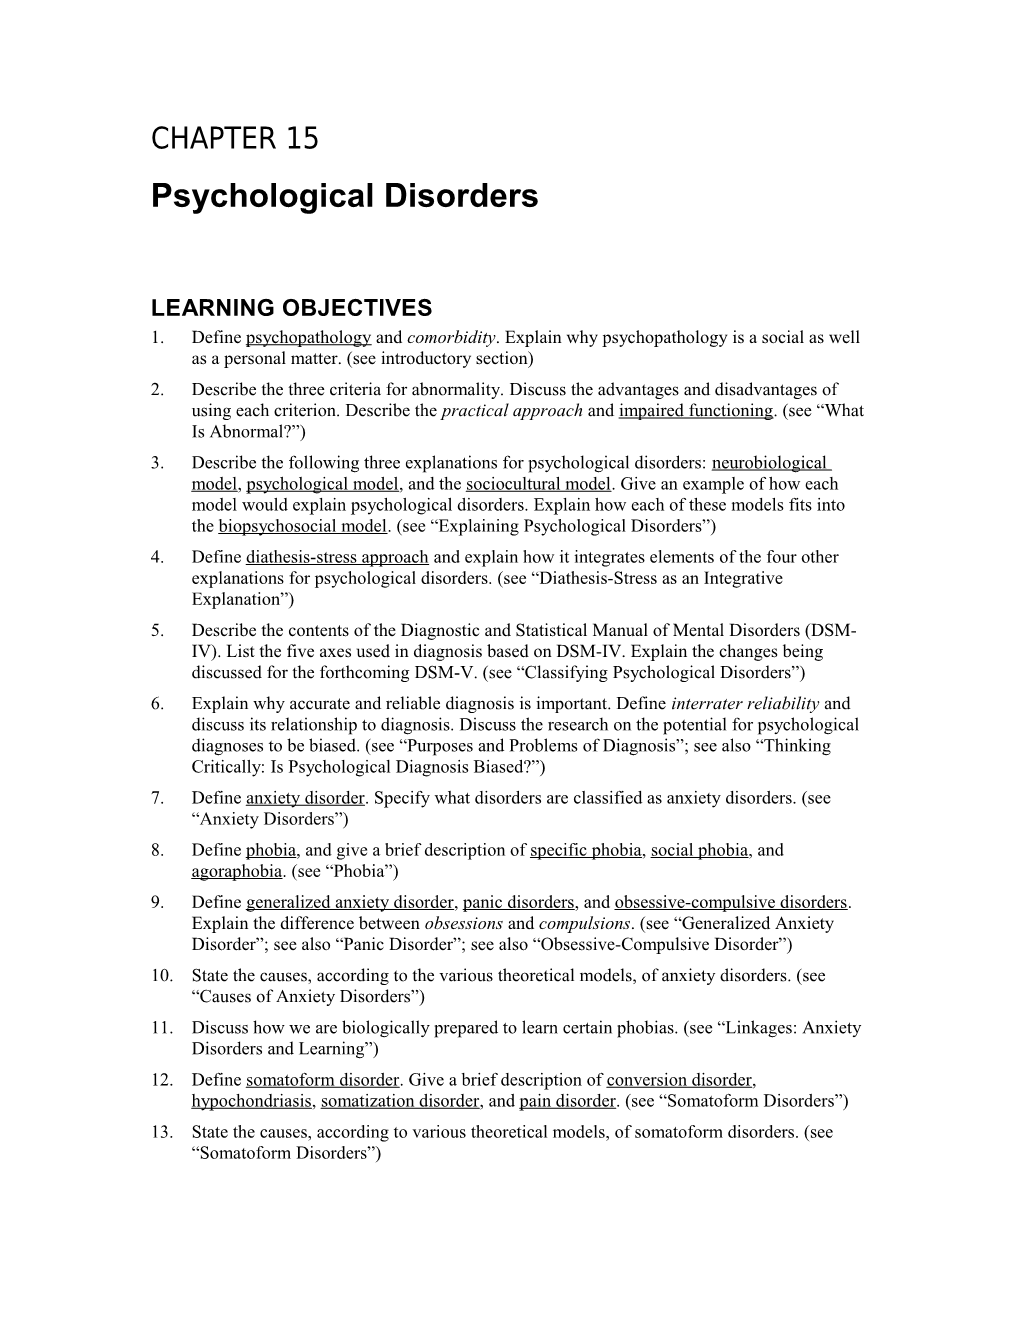 Psychological Disorders s1